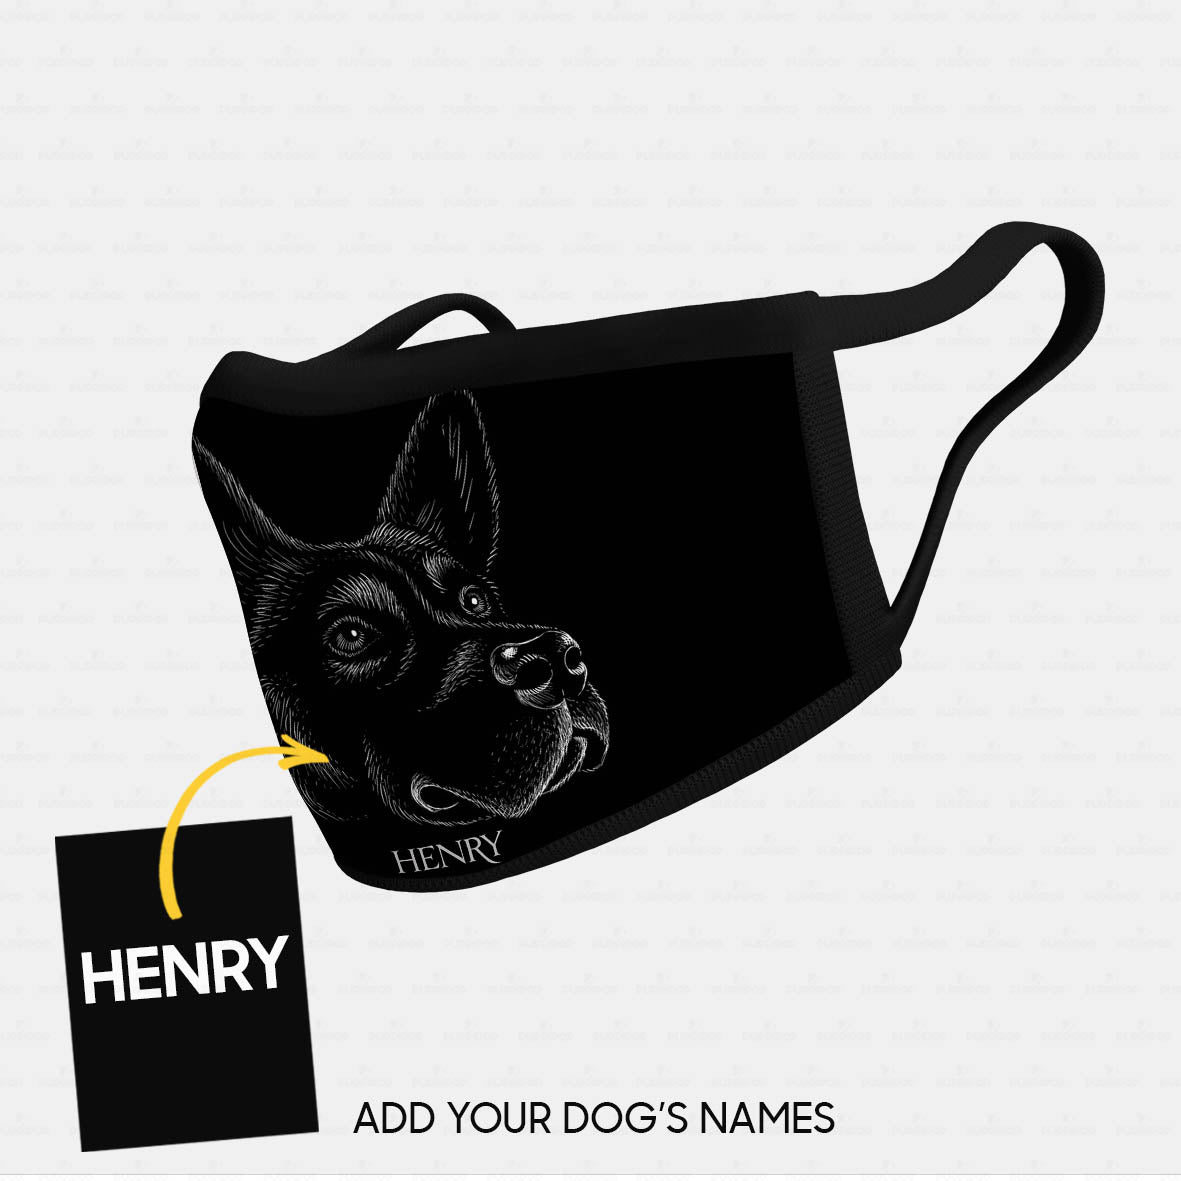 Personalized Dog Gift Idea - All Black Dog With Longer Ears For Dog Lovers - Cloth Mask